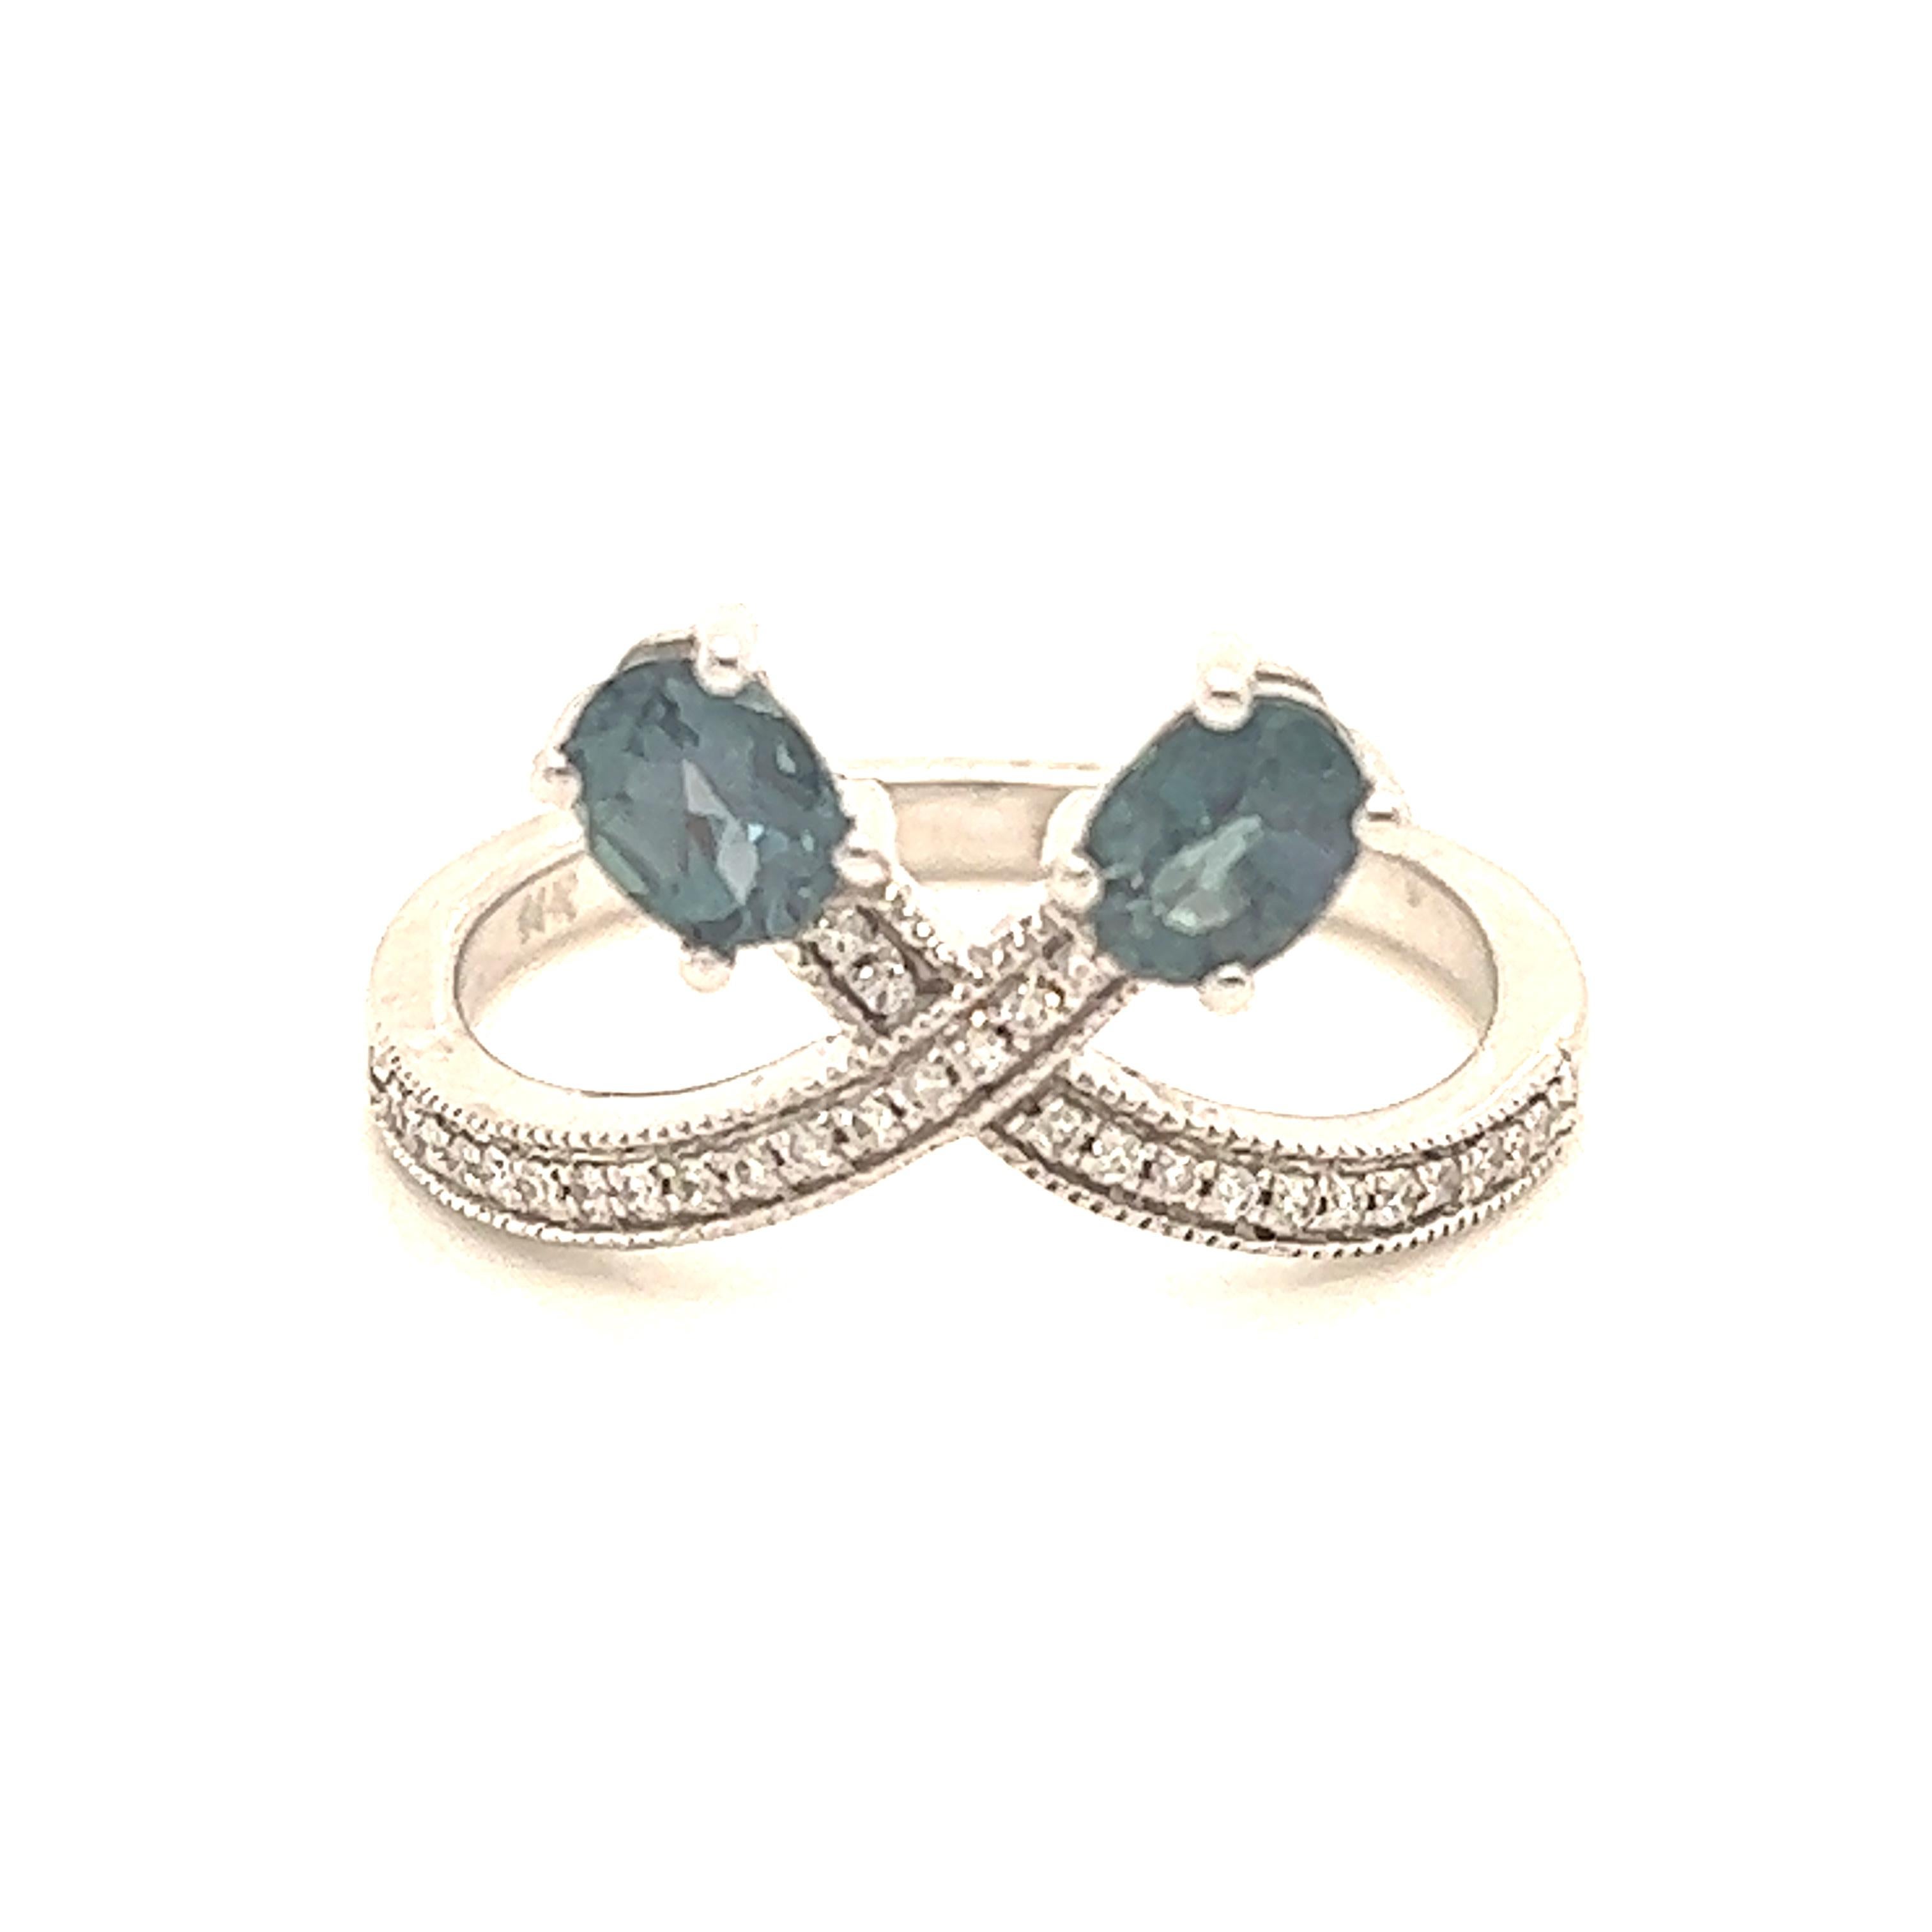 This is a gorgeous natural AAA quality Alexandrite surrounded by dainty diamonds that is set in a vintage White Gold setting. This ring features a natural 0.68 carat oval alexandrite that is surrounded by brilliant white diamonds. The ring is a true